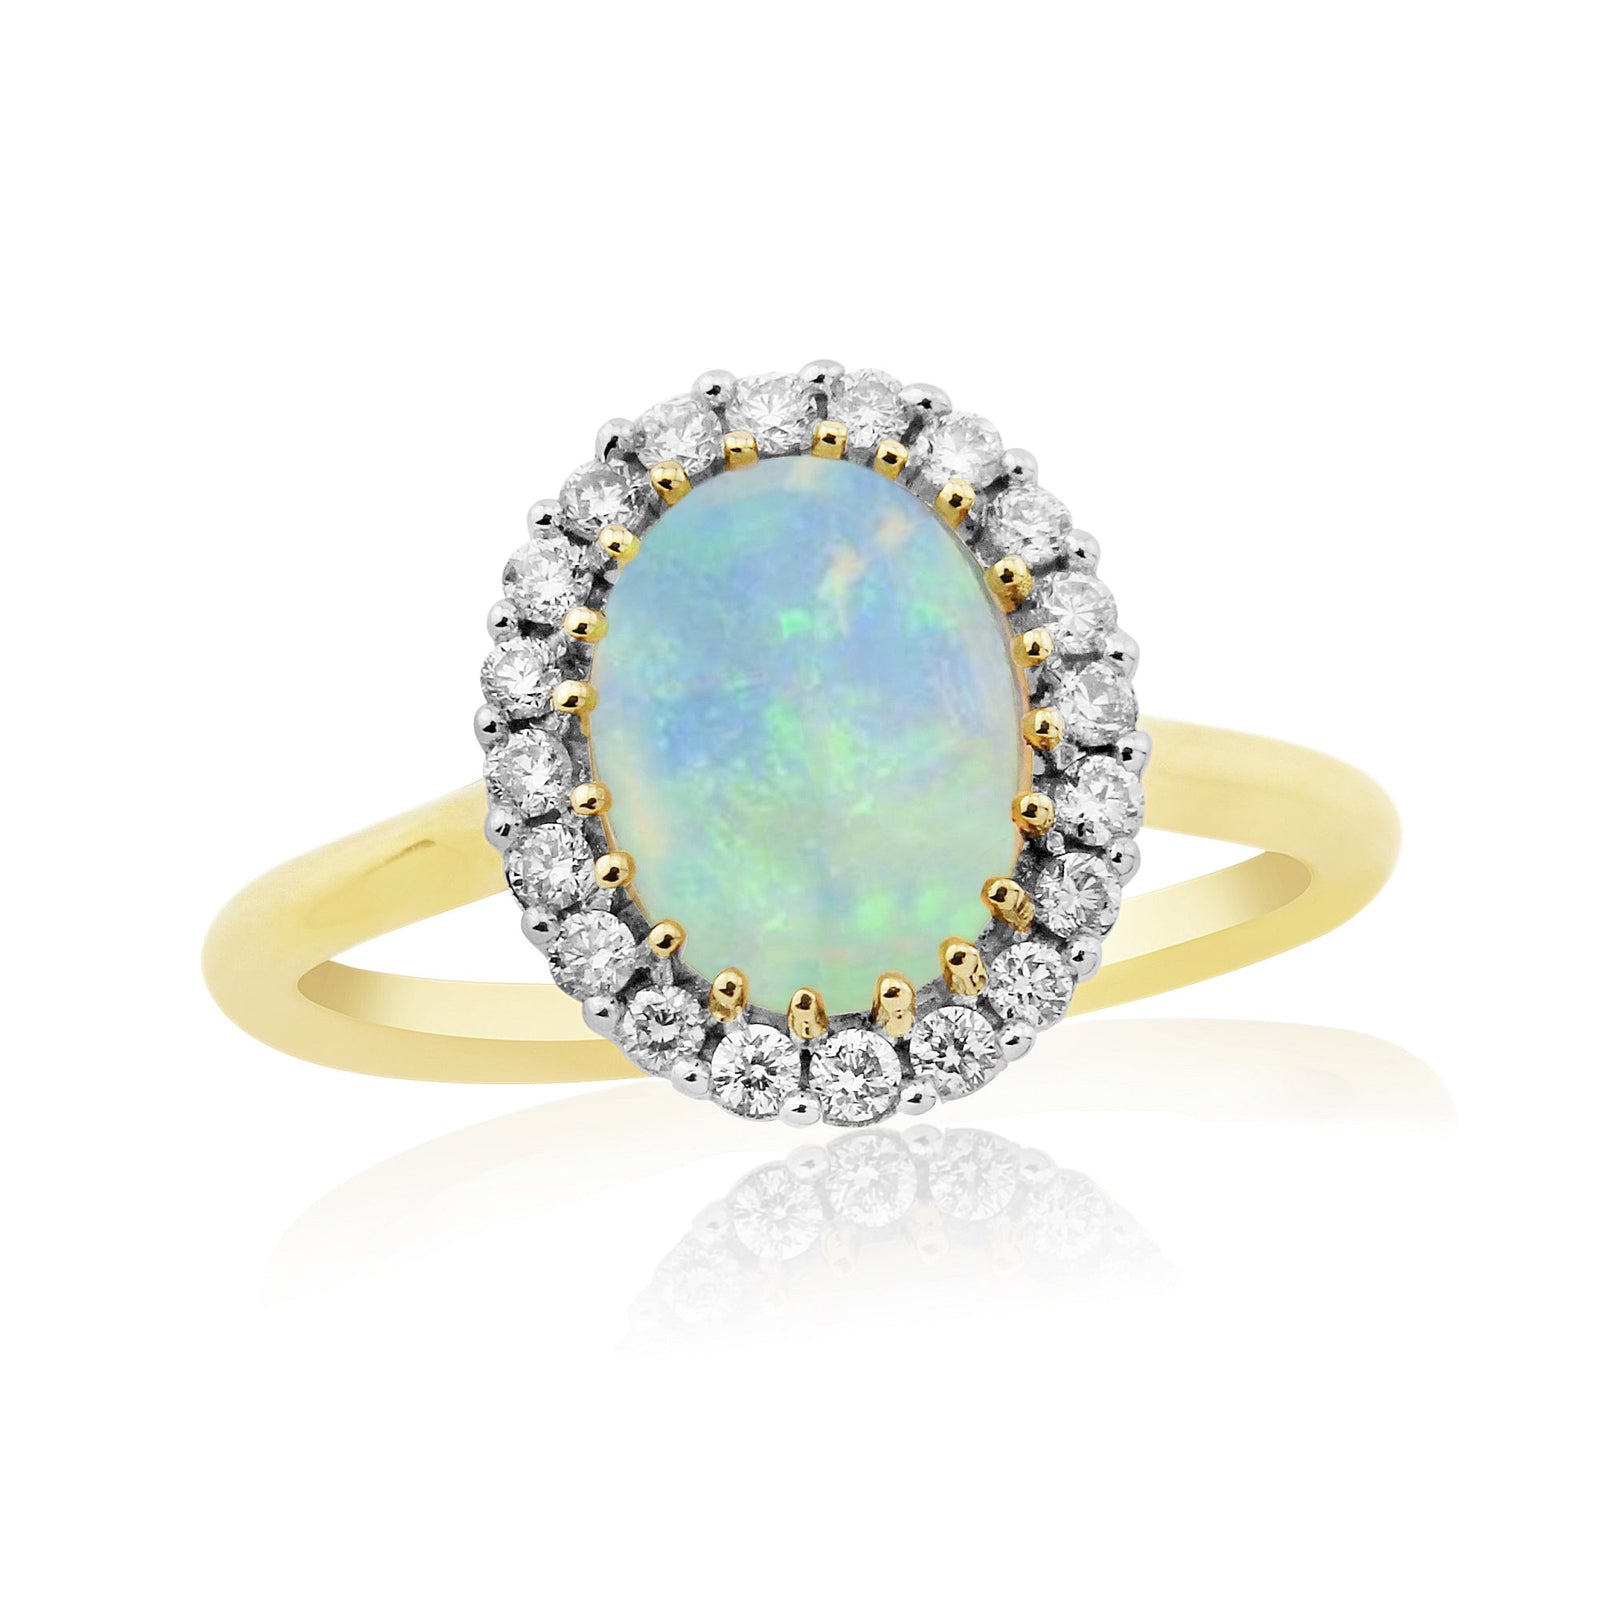 9ct gold 9x7mm oval opal & diamond cluster ring 0.24ct